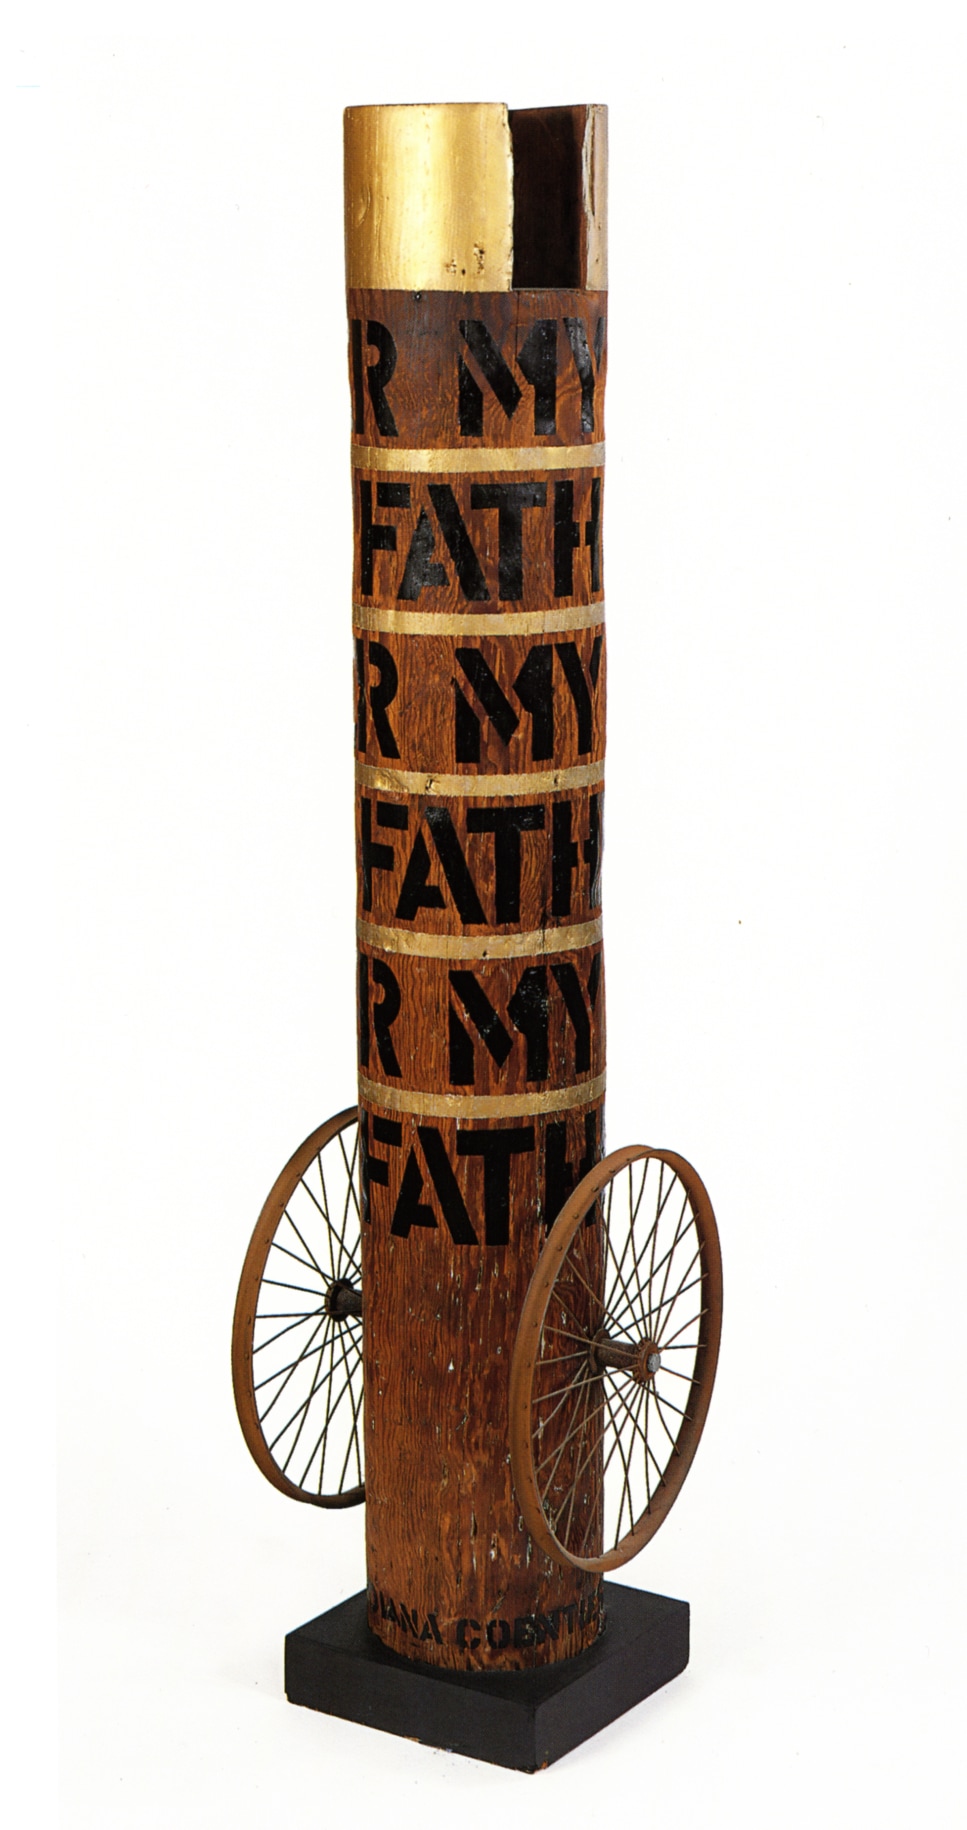 Column with its title &quot;My Father&quot; painted in five rows around the column in black stenciled letters. The top of the column is painted gold, and thin gold strips around the column separate each row of text. At the bottom of the column, on both sides, is a wheel.